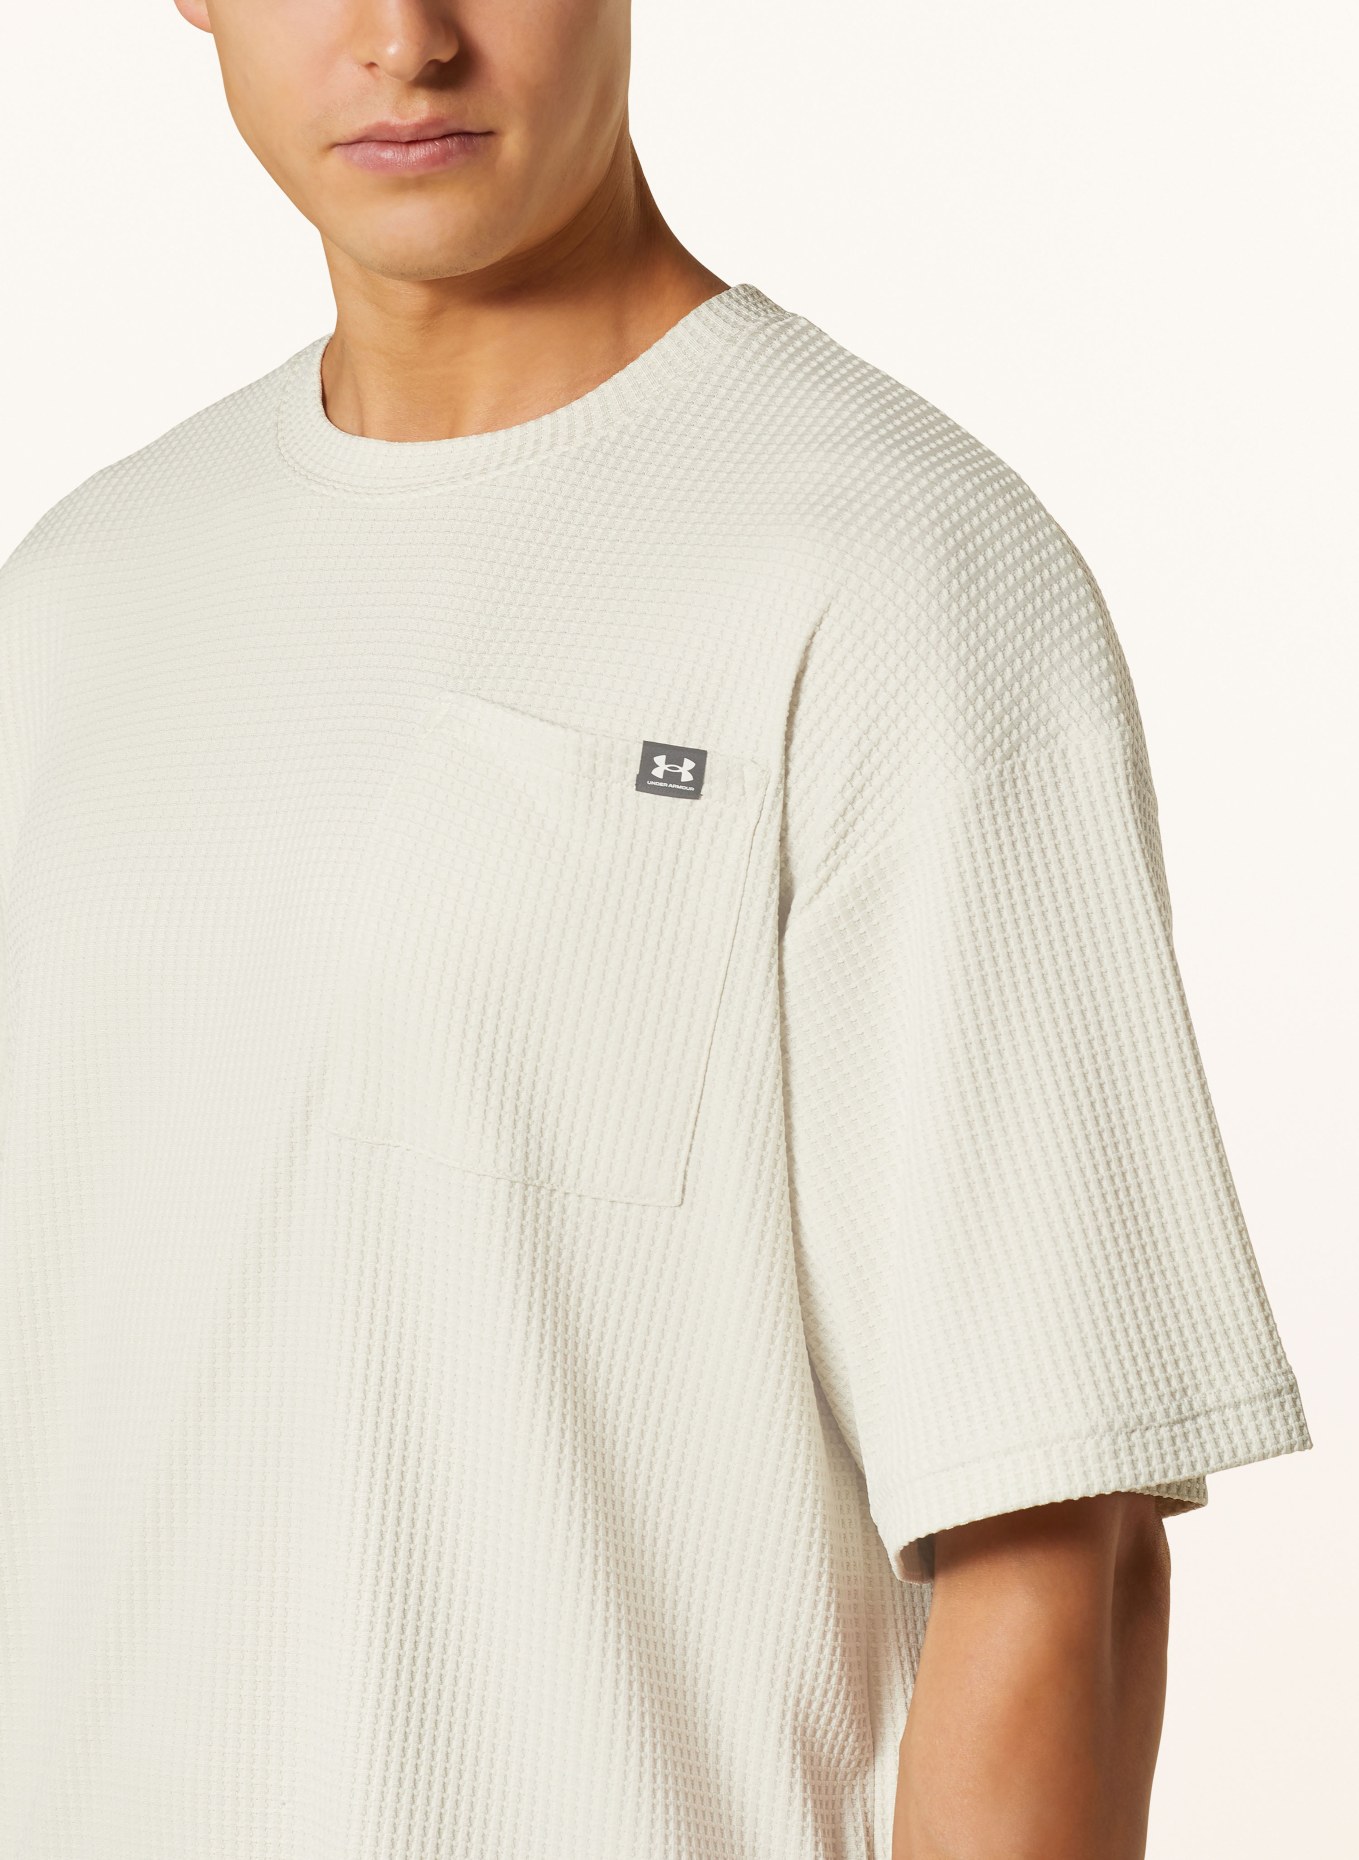 UNDER ARMOUR Oversized-Shirt RIVAL, Farbe: MINT (Bild 4)